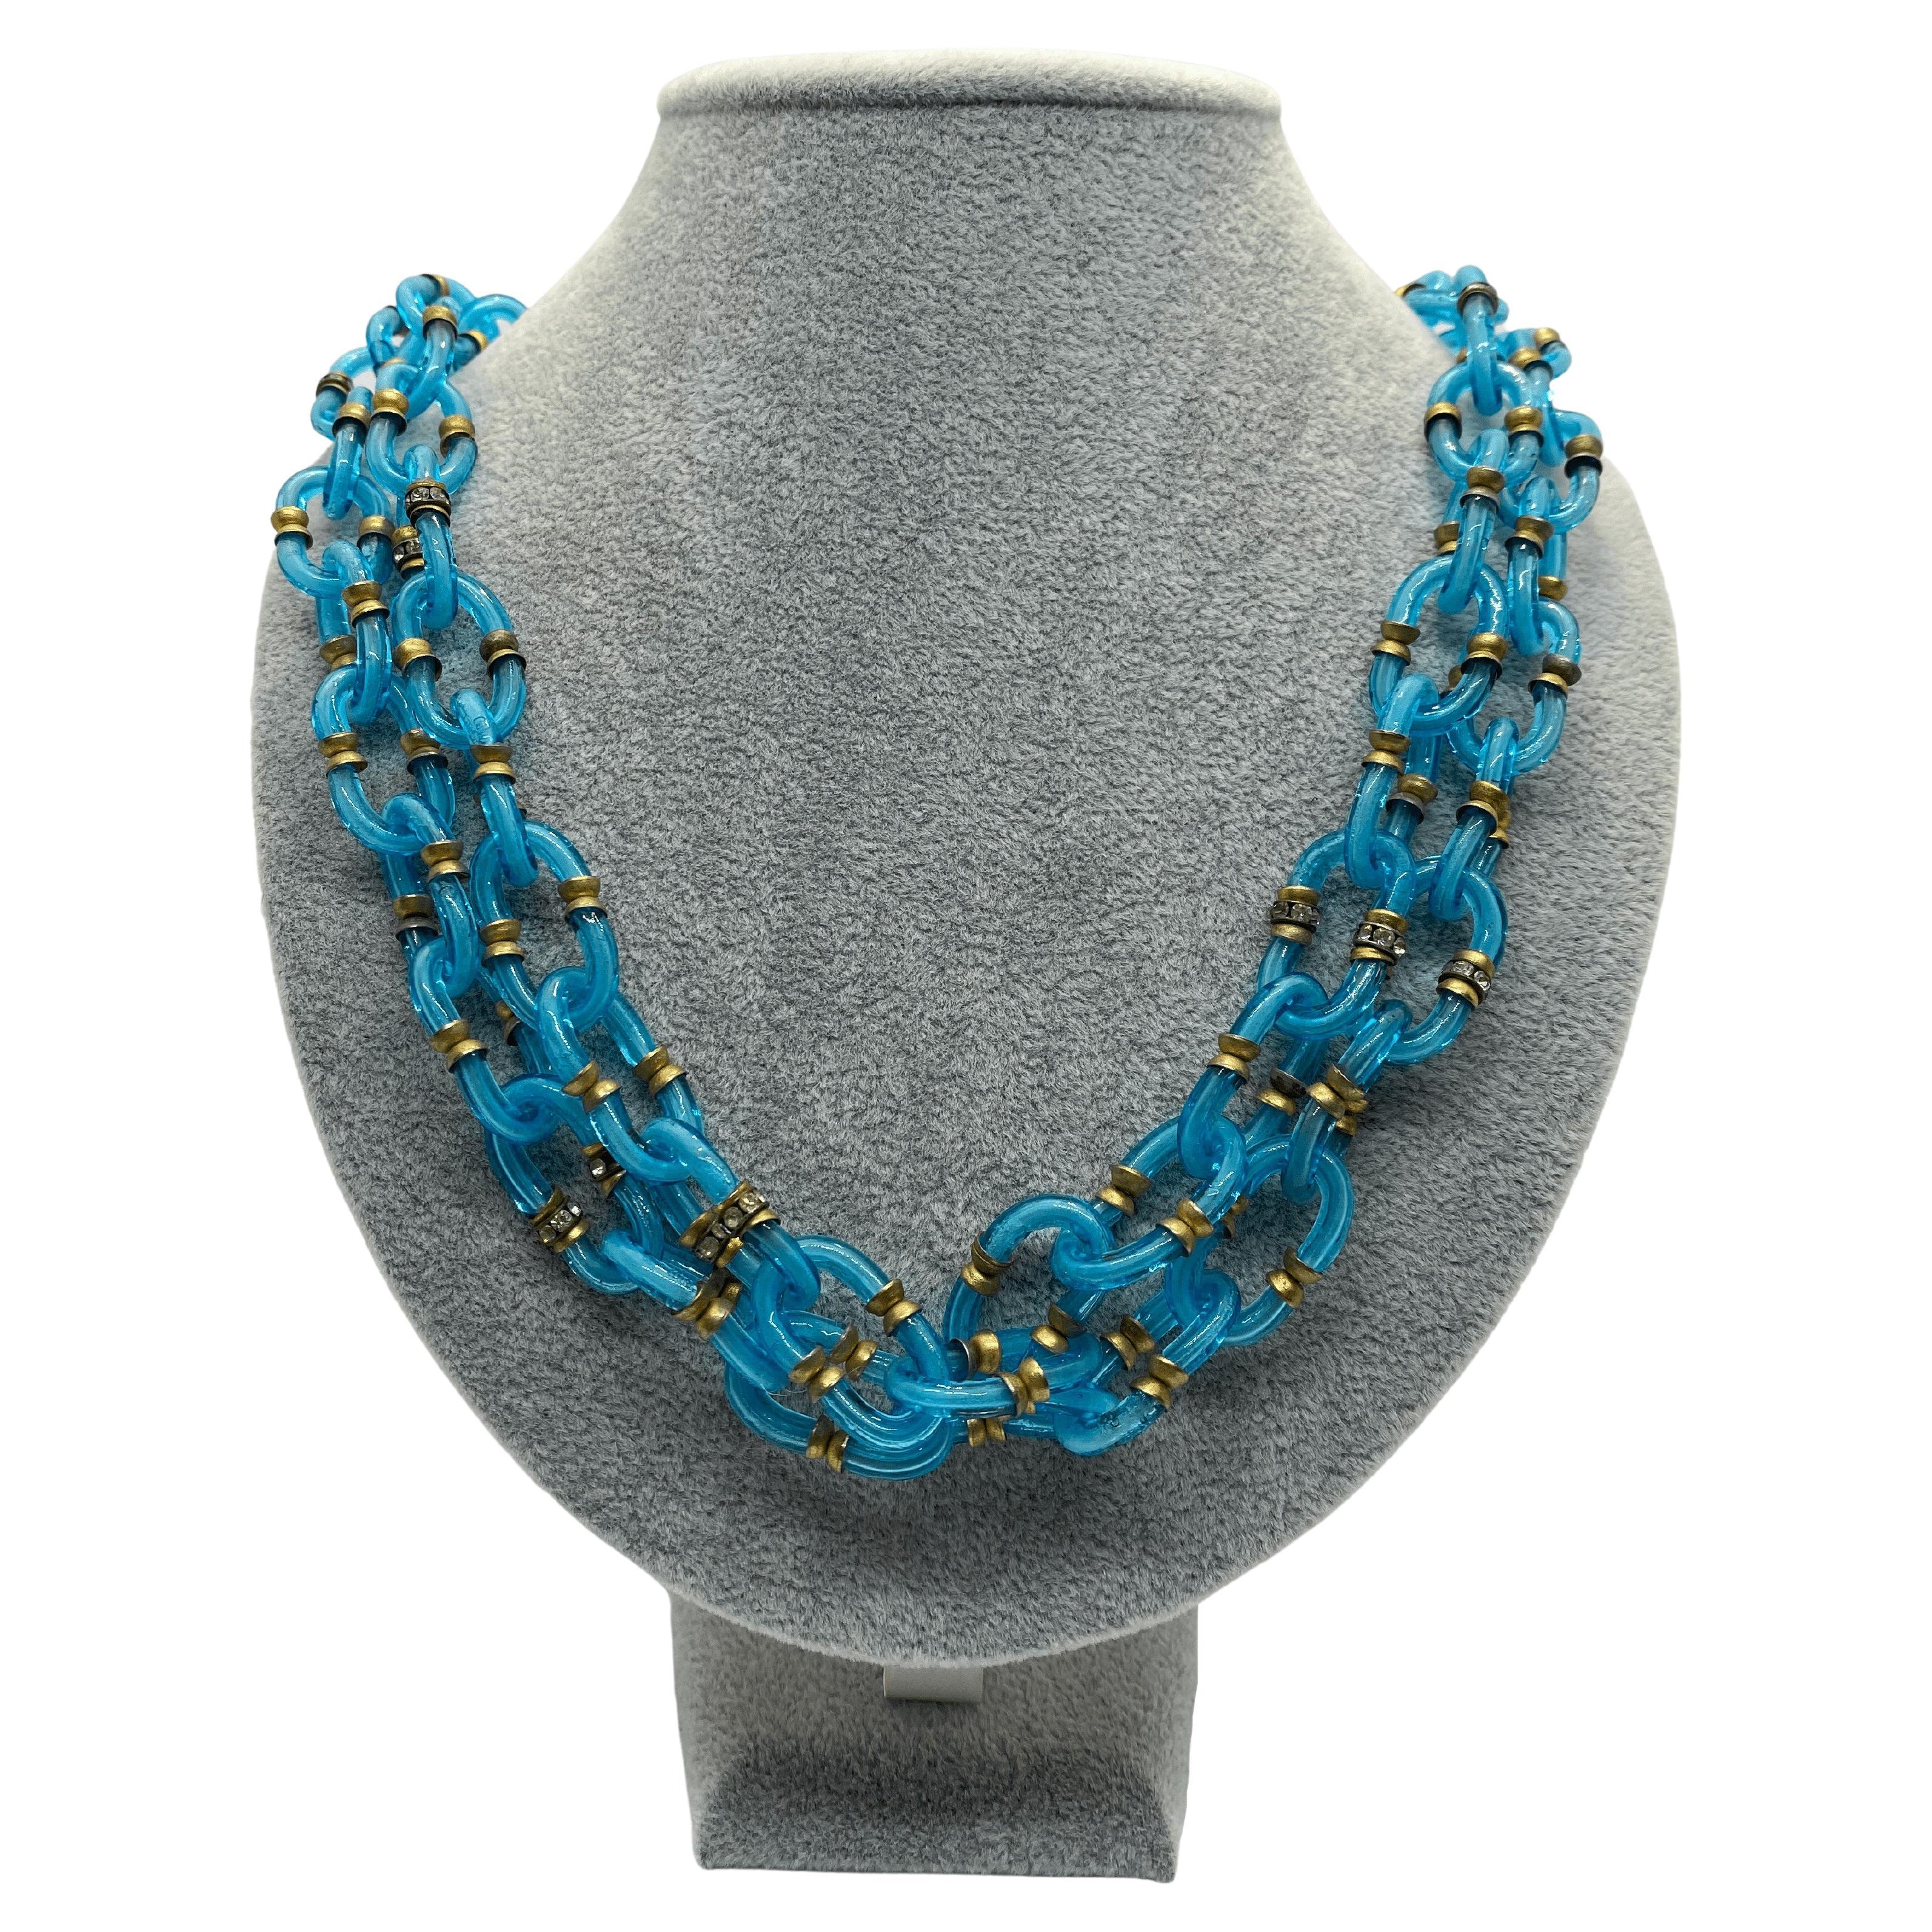 Archimede Seguso for Chanel Murano Glass Vintage Turquoise Necklace, 1960s